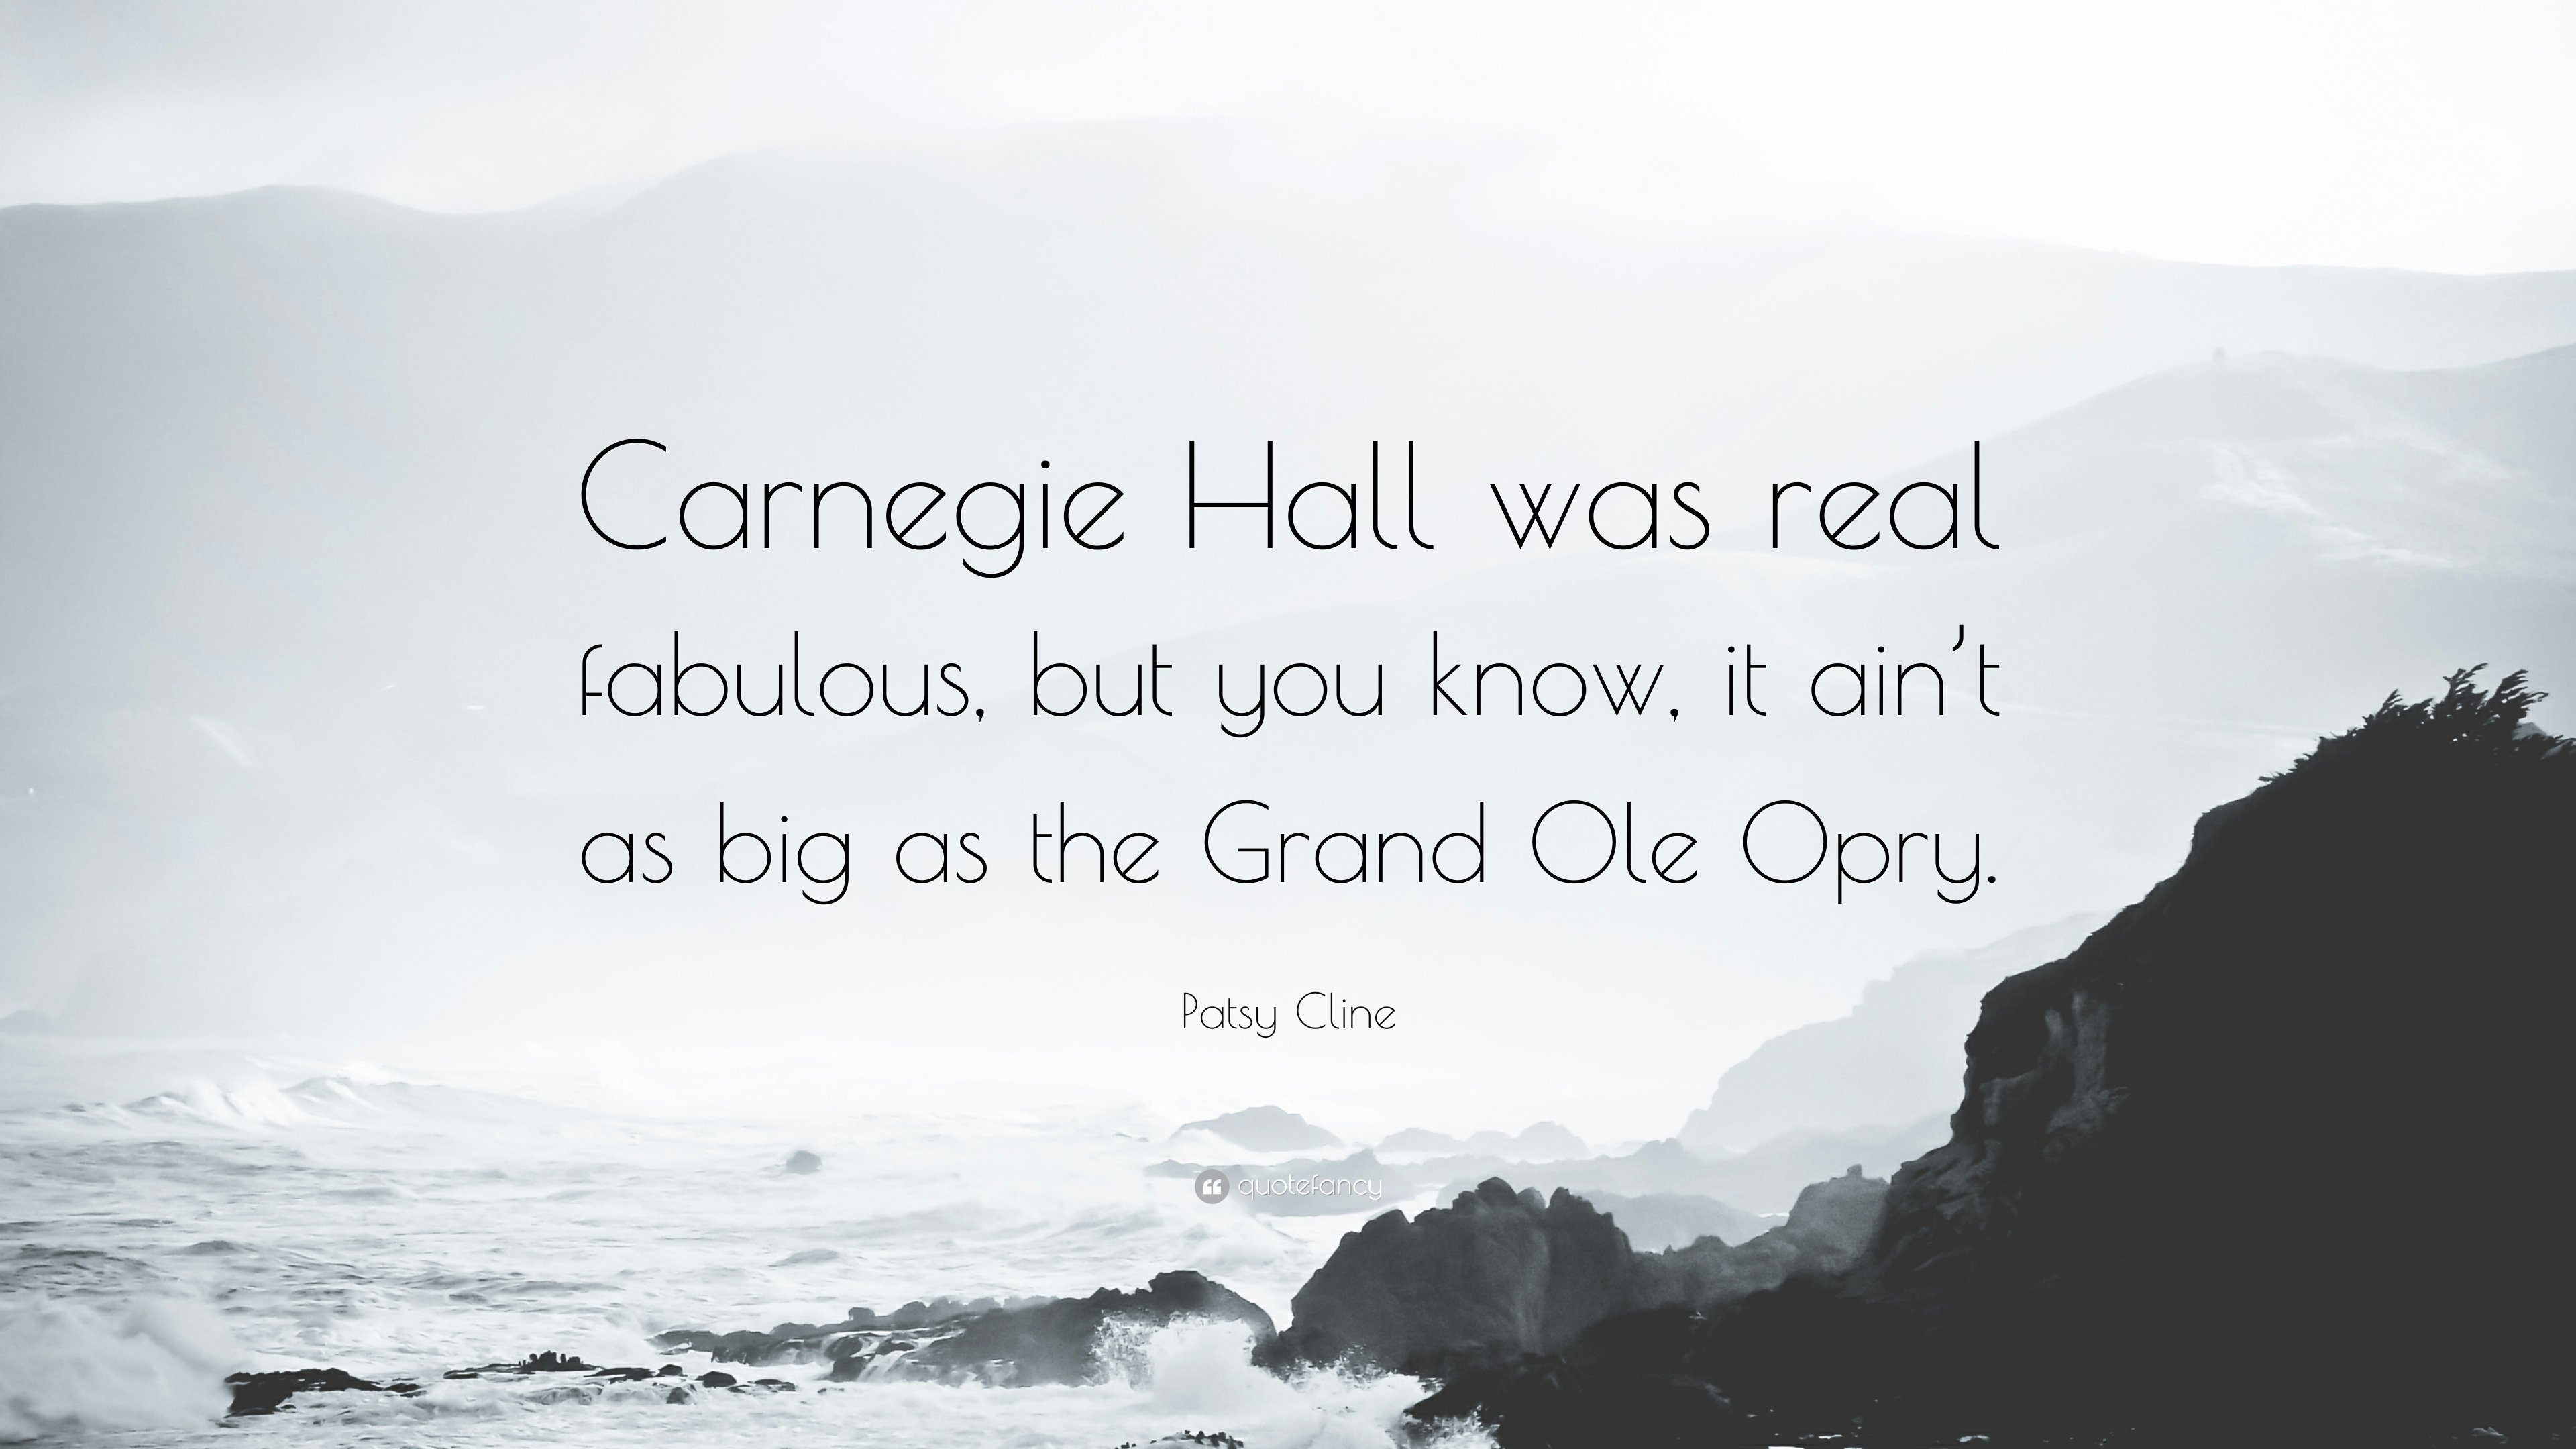 Patsy Cline Quote: “Carnegie Hall was real fabulous, but you know